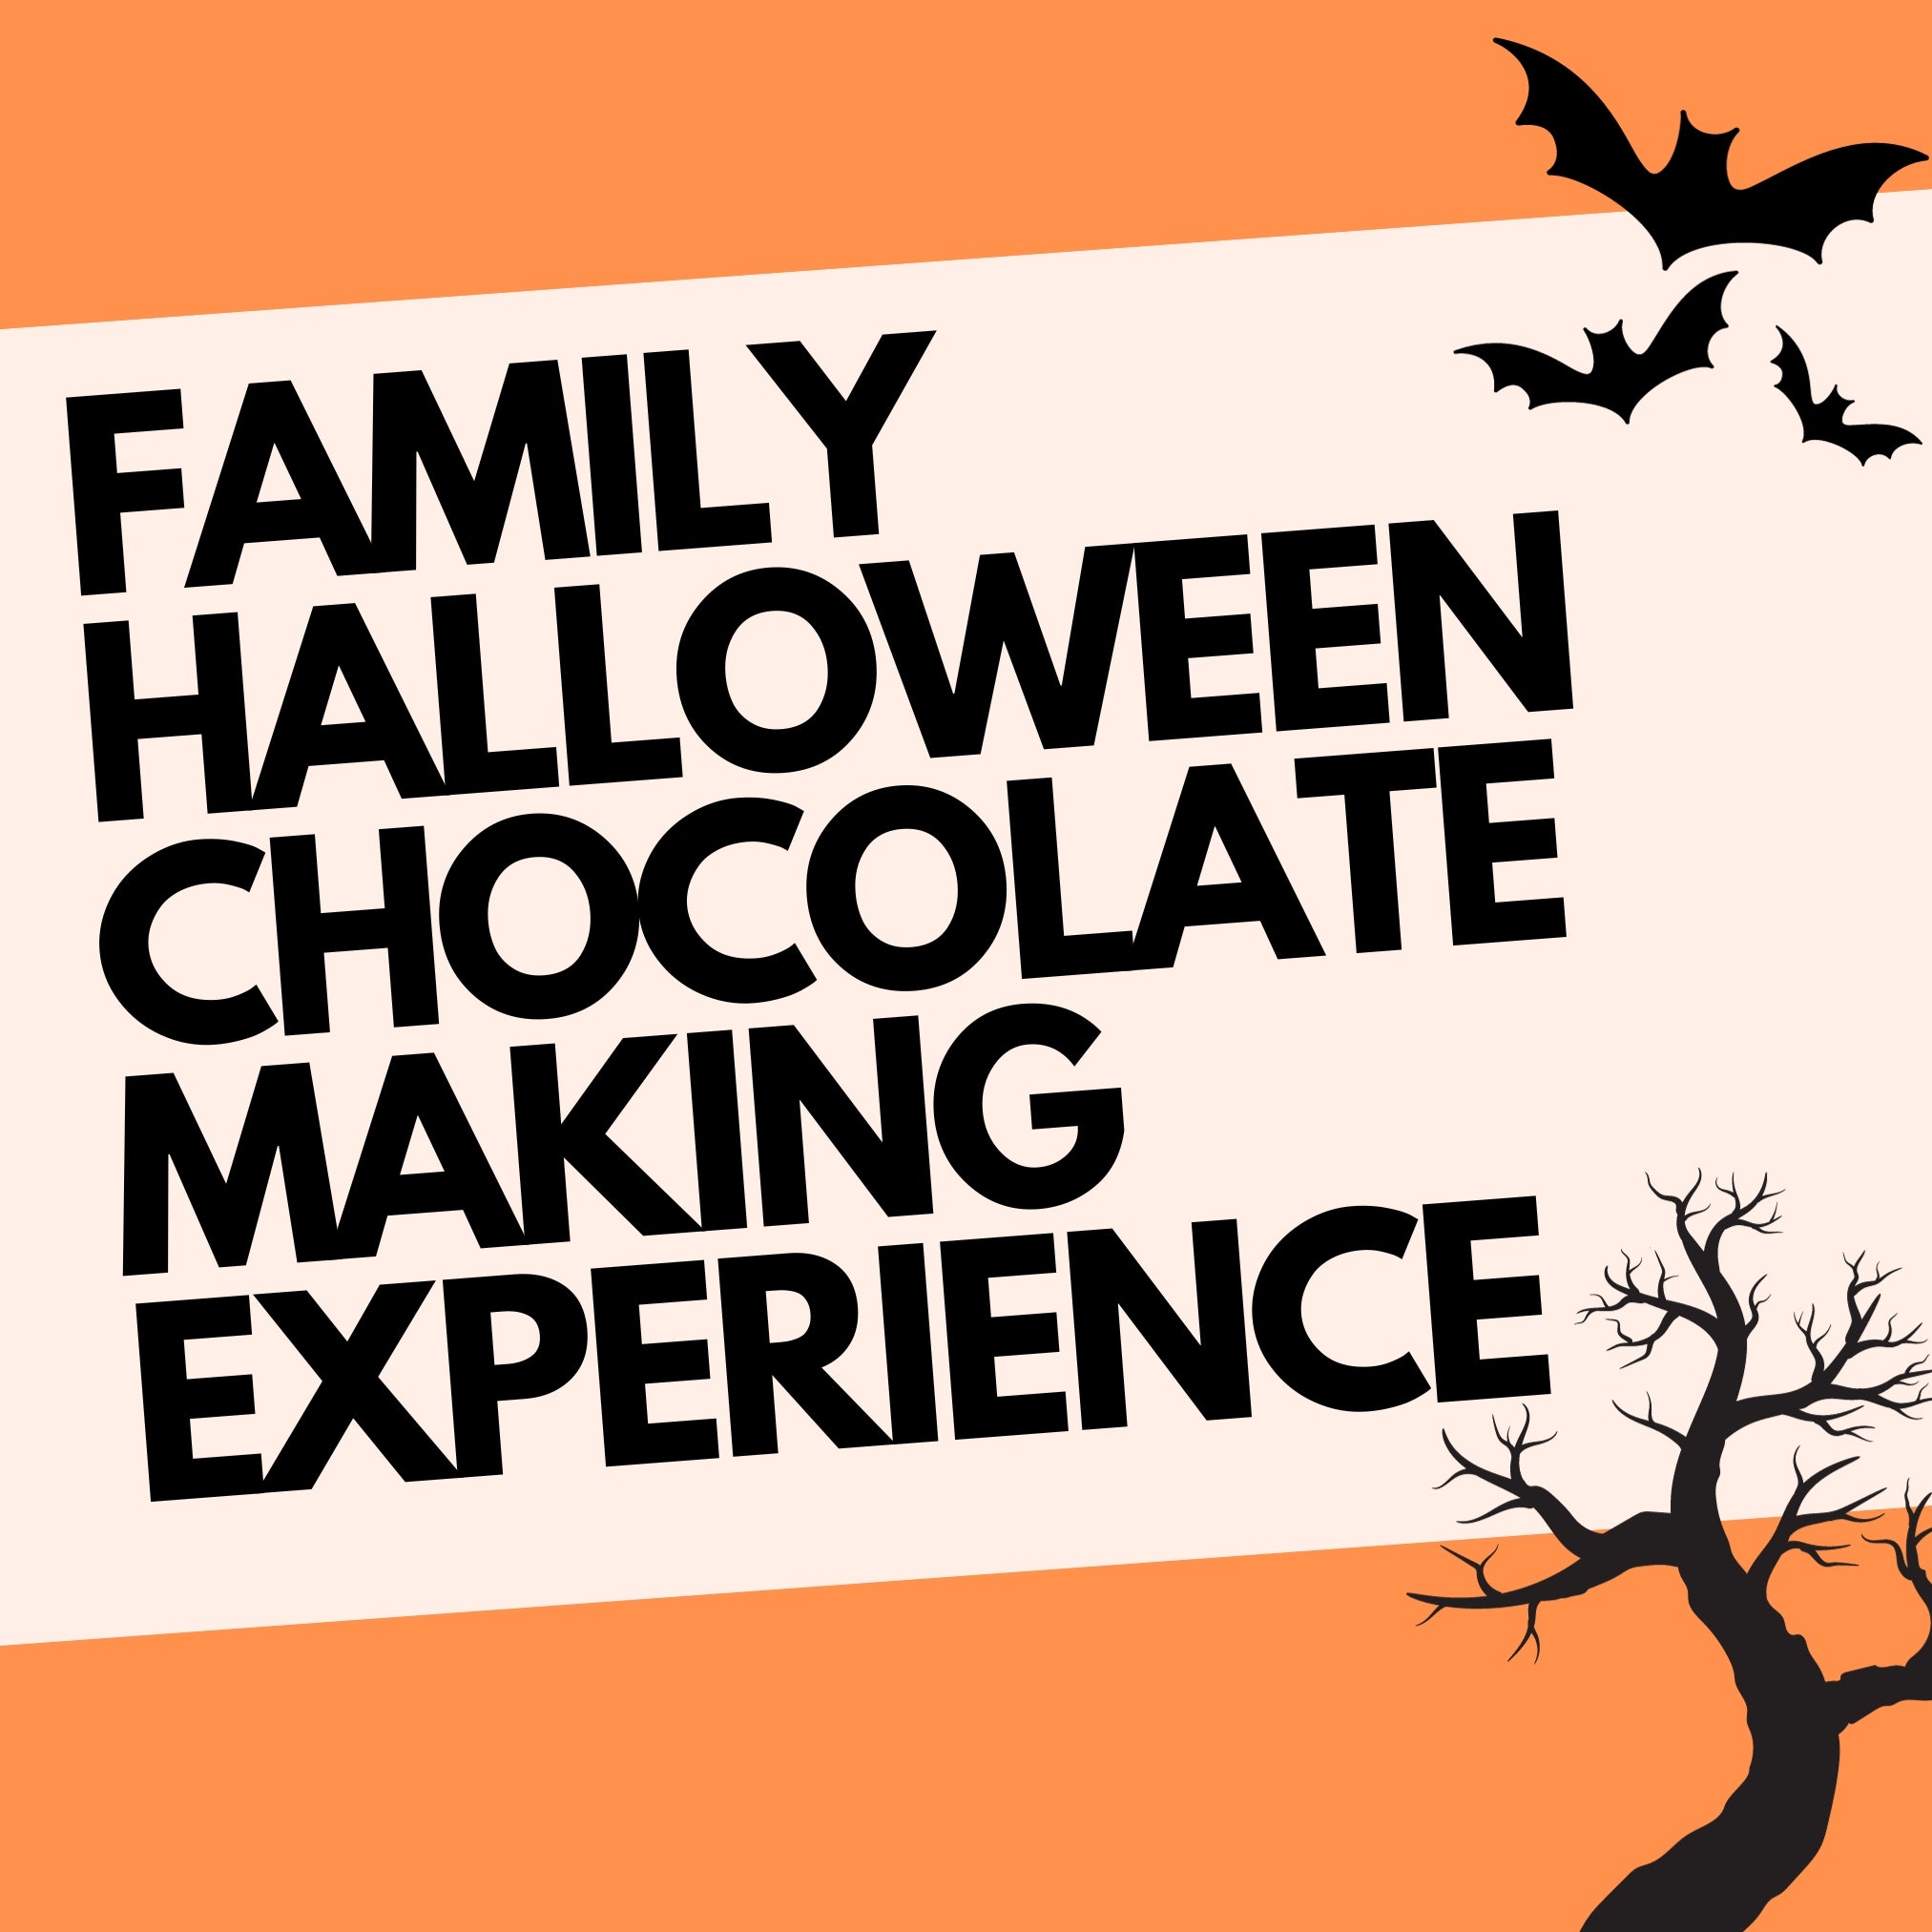 Family Halloween Chocolate Making Experience